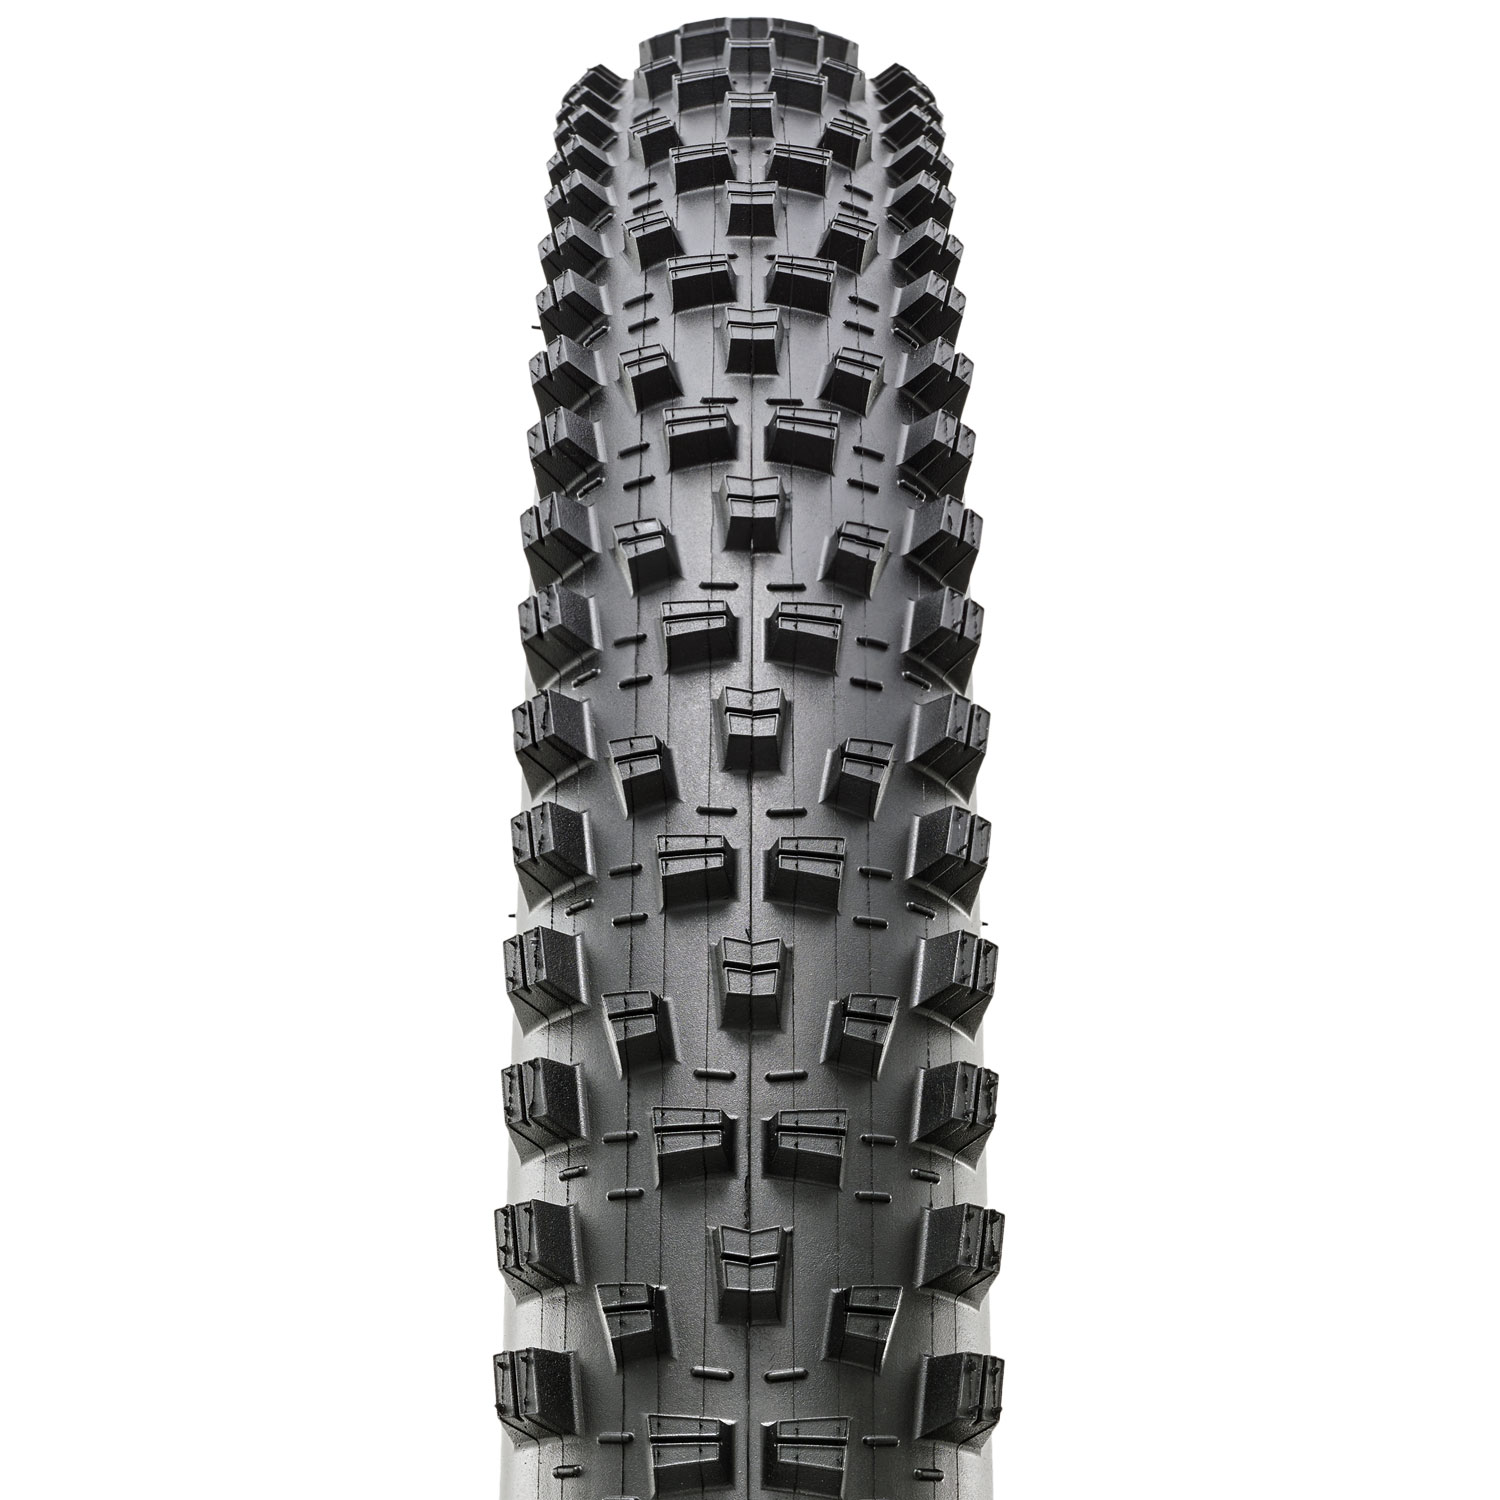 Maxxis Forekaster 27.5 x 2.35 65 PSI Wire Bead Tyre 